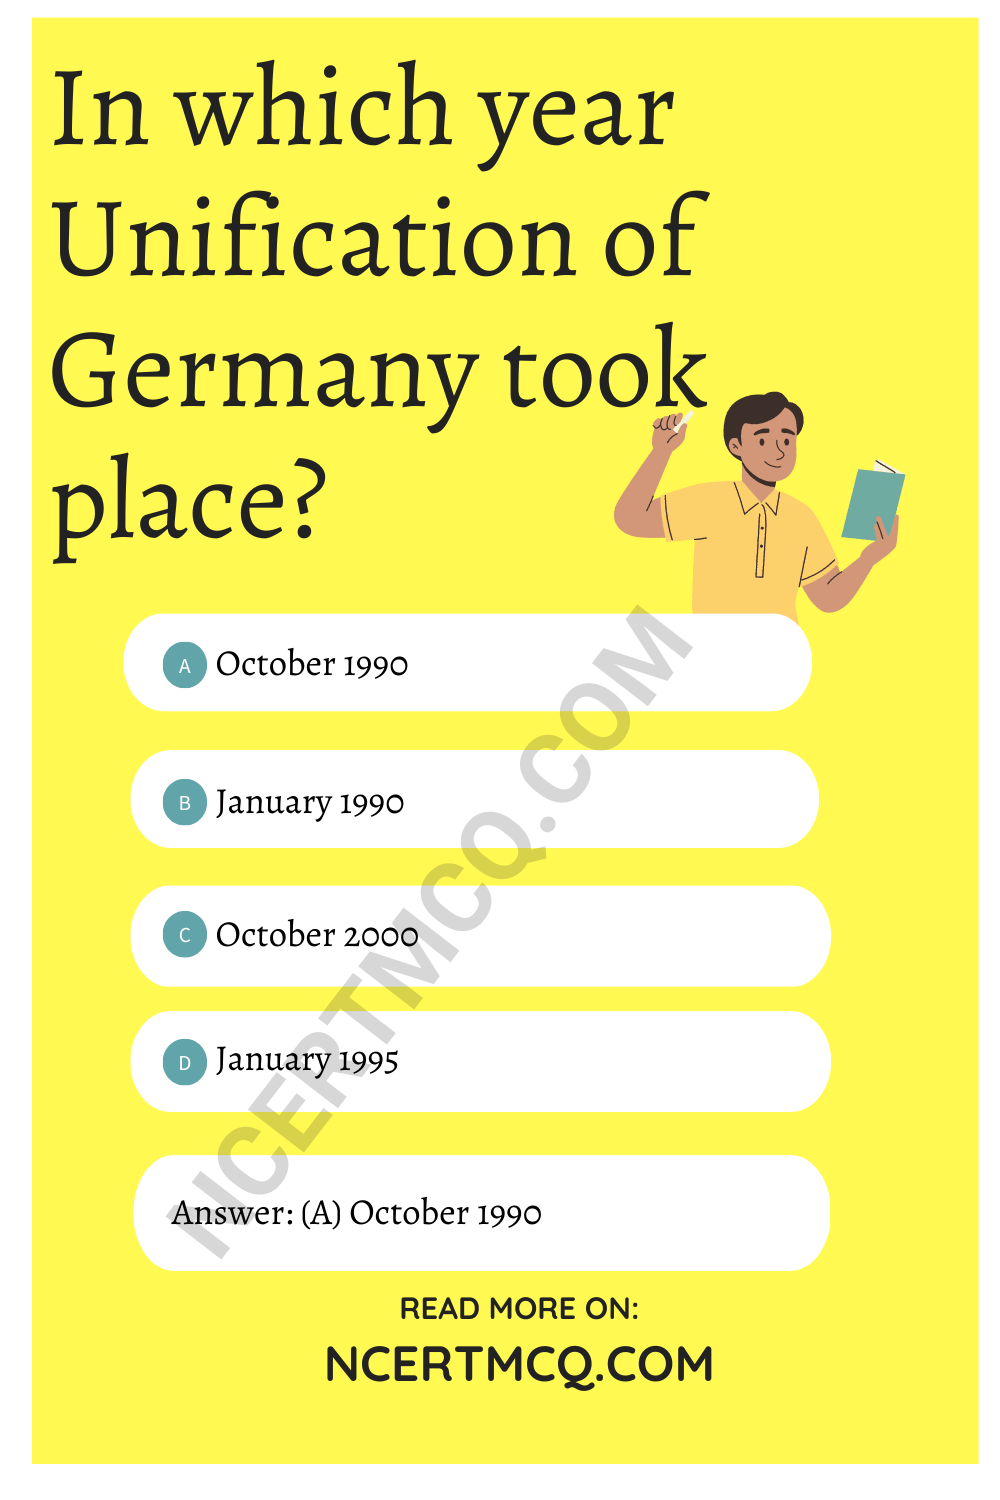 In which year Unification of Germany took place?